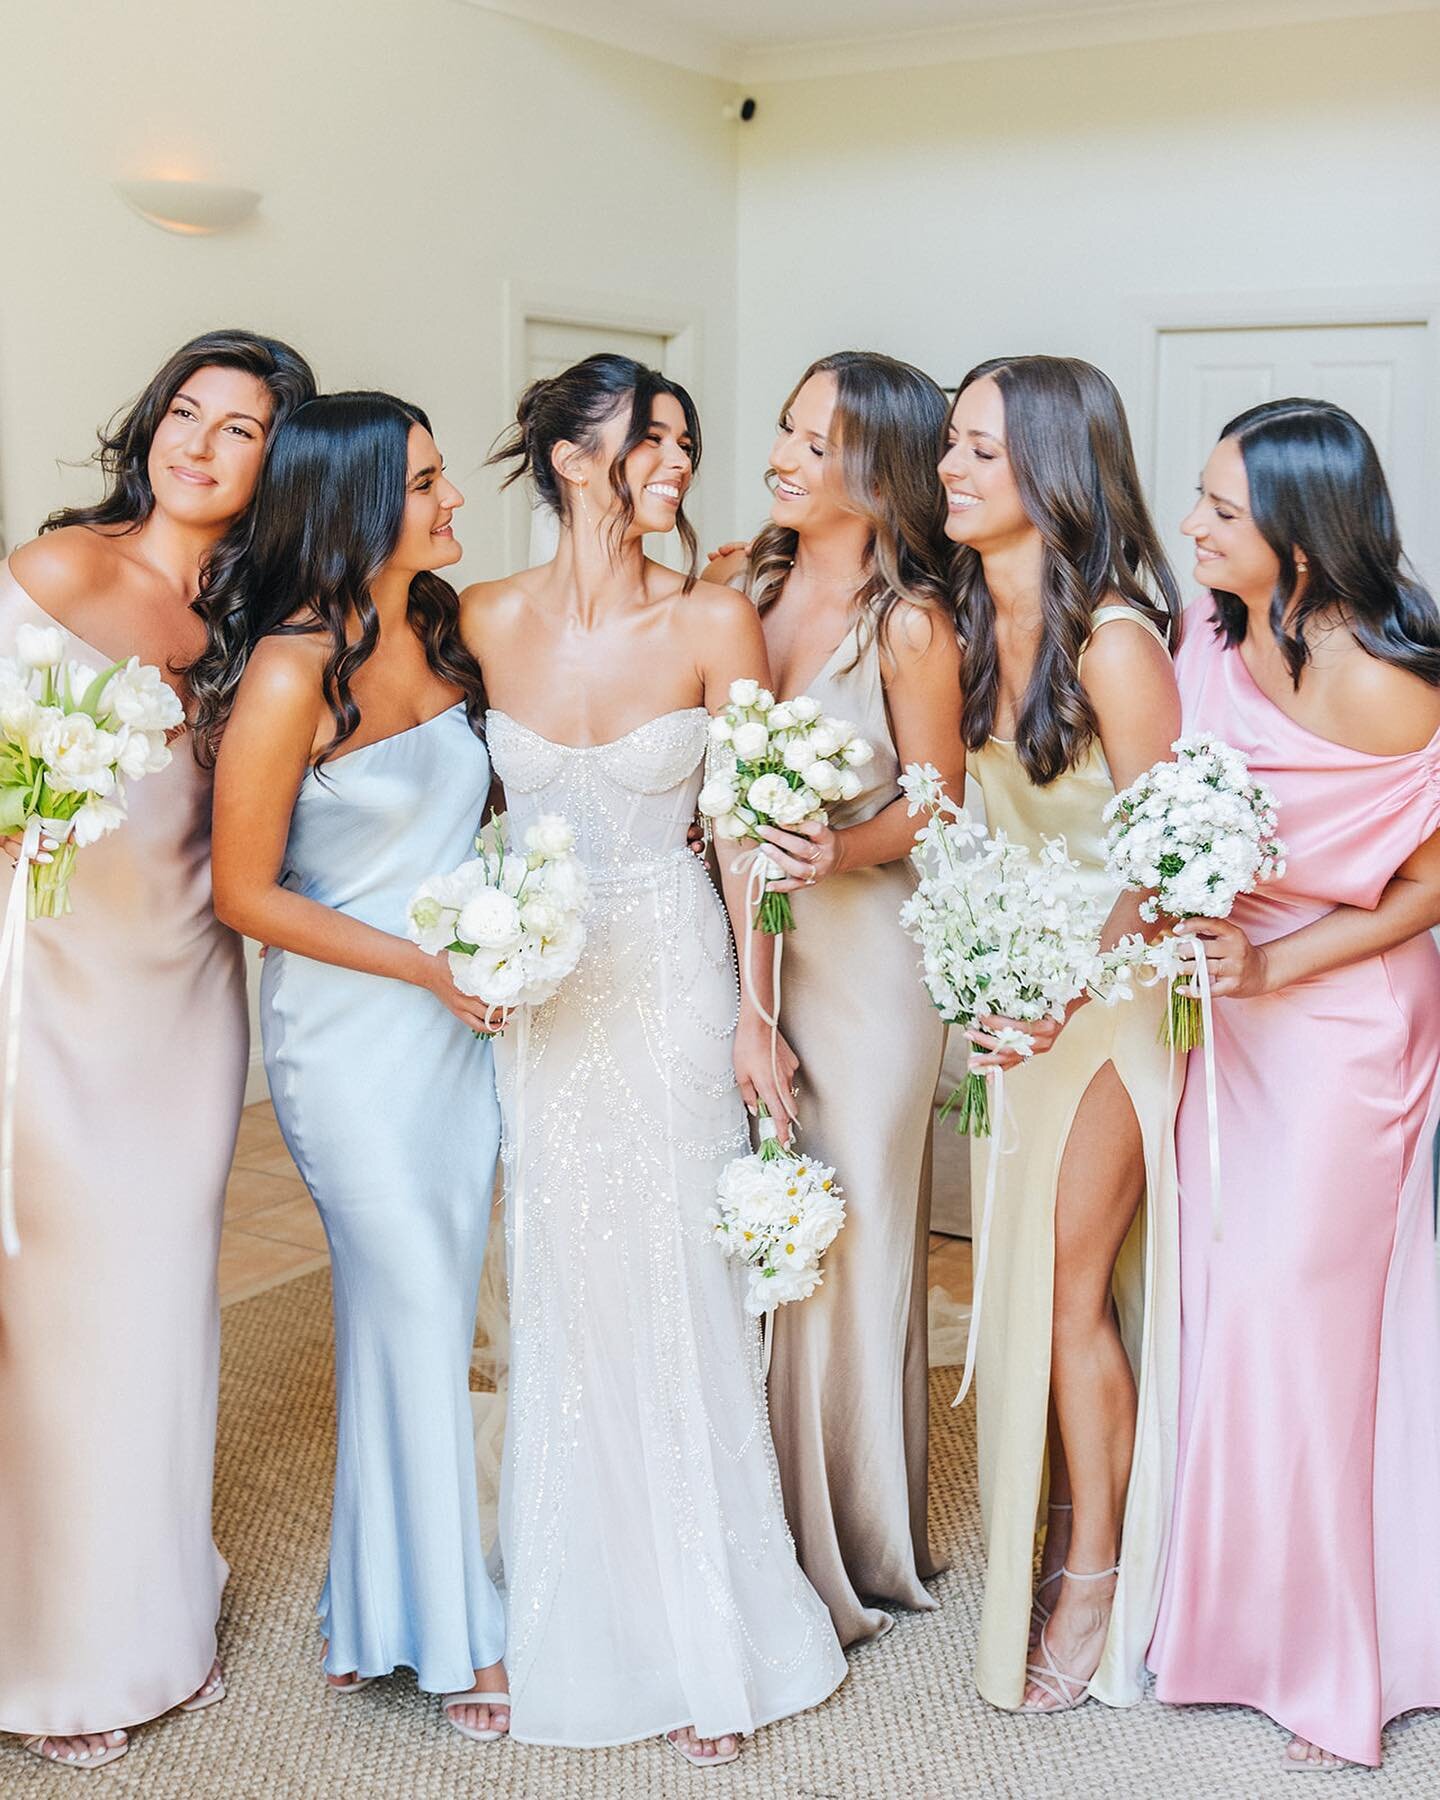 QUEENS X 6 ✨

Bianca&rsquo;s girls wore the most stunning mix of warm pastel dresses, complimented by mismatched seasonal bouquets.

When I posted these BTS clips (swipe left ⬅️), my DM&rsquo;s exploded with questions about these dresses. It&rsquo;s 